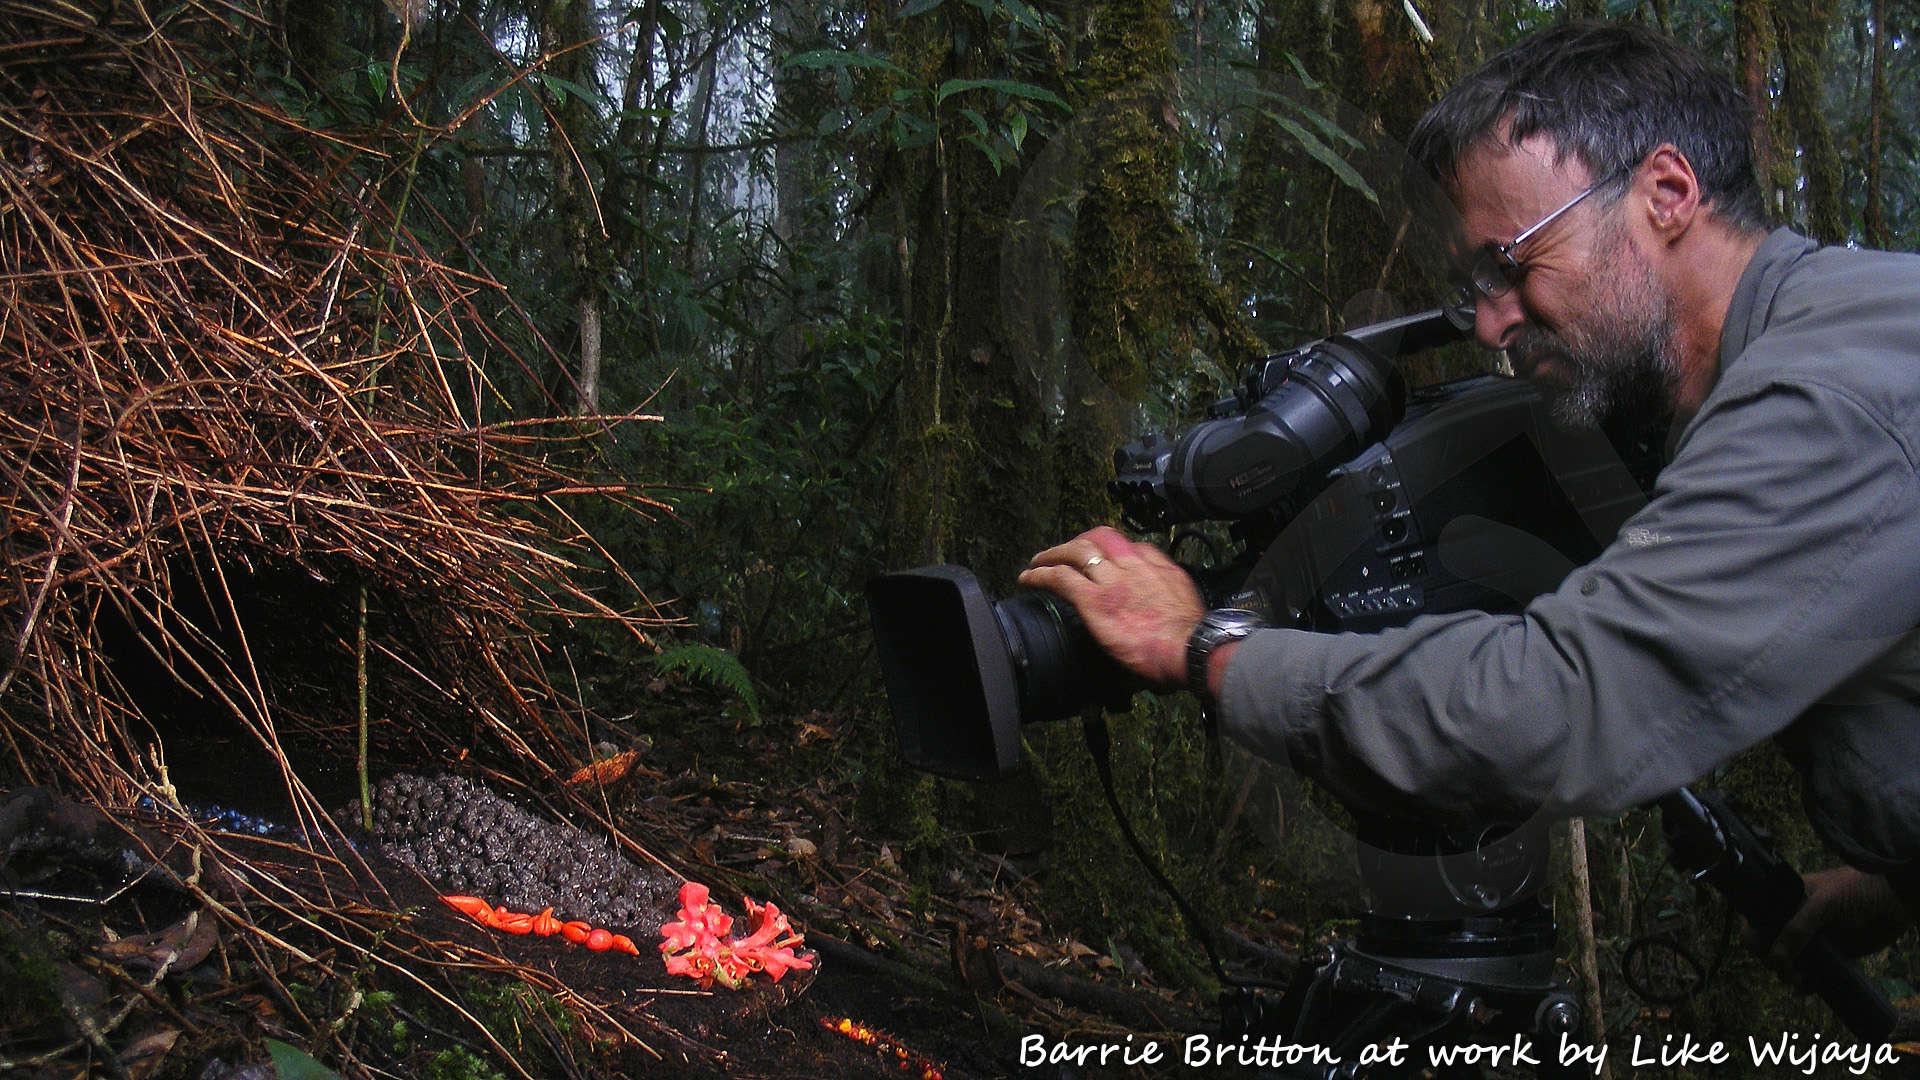 Cameraman Barrie Britton spent nearly 200 hours sequestrated in hides in order to obtain the ultimate dream-sequence of courting and mating vogelkop bowerbirds, not surprisingly a world first! Copyright © Like Wijaya